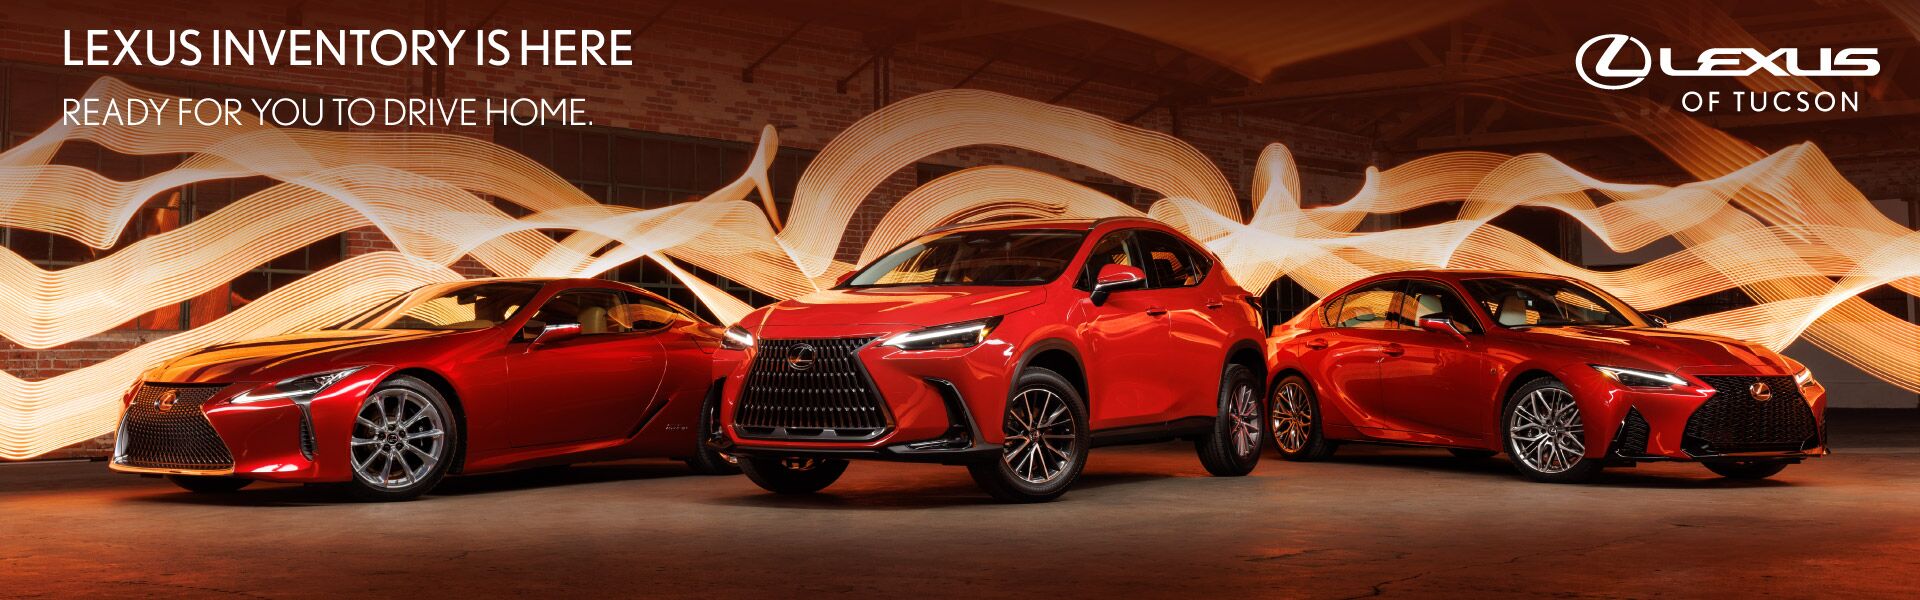 Search All New Vehicels at Lexus of Tucson Speedway Tucson AZ